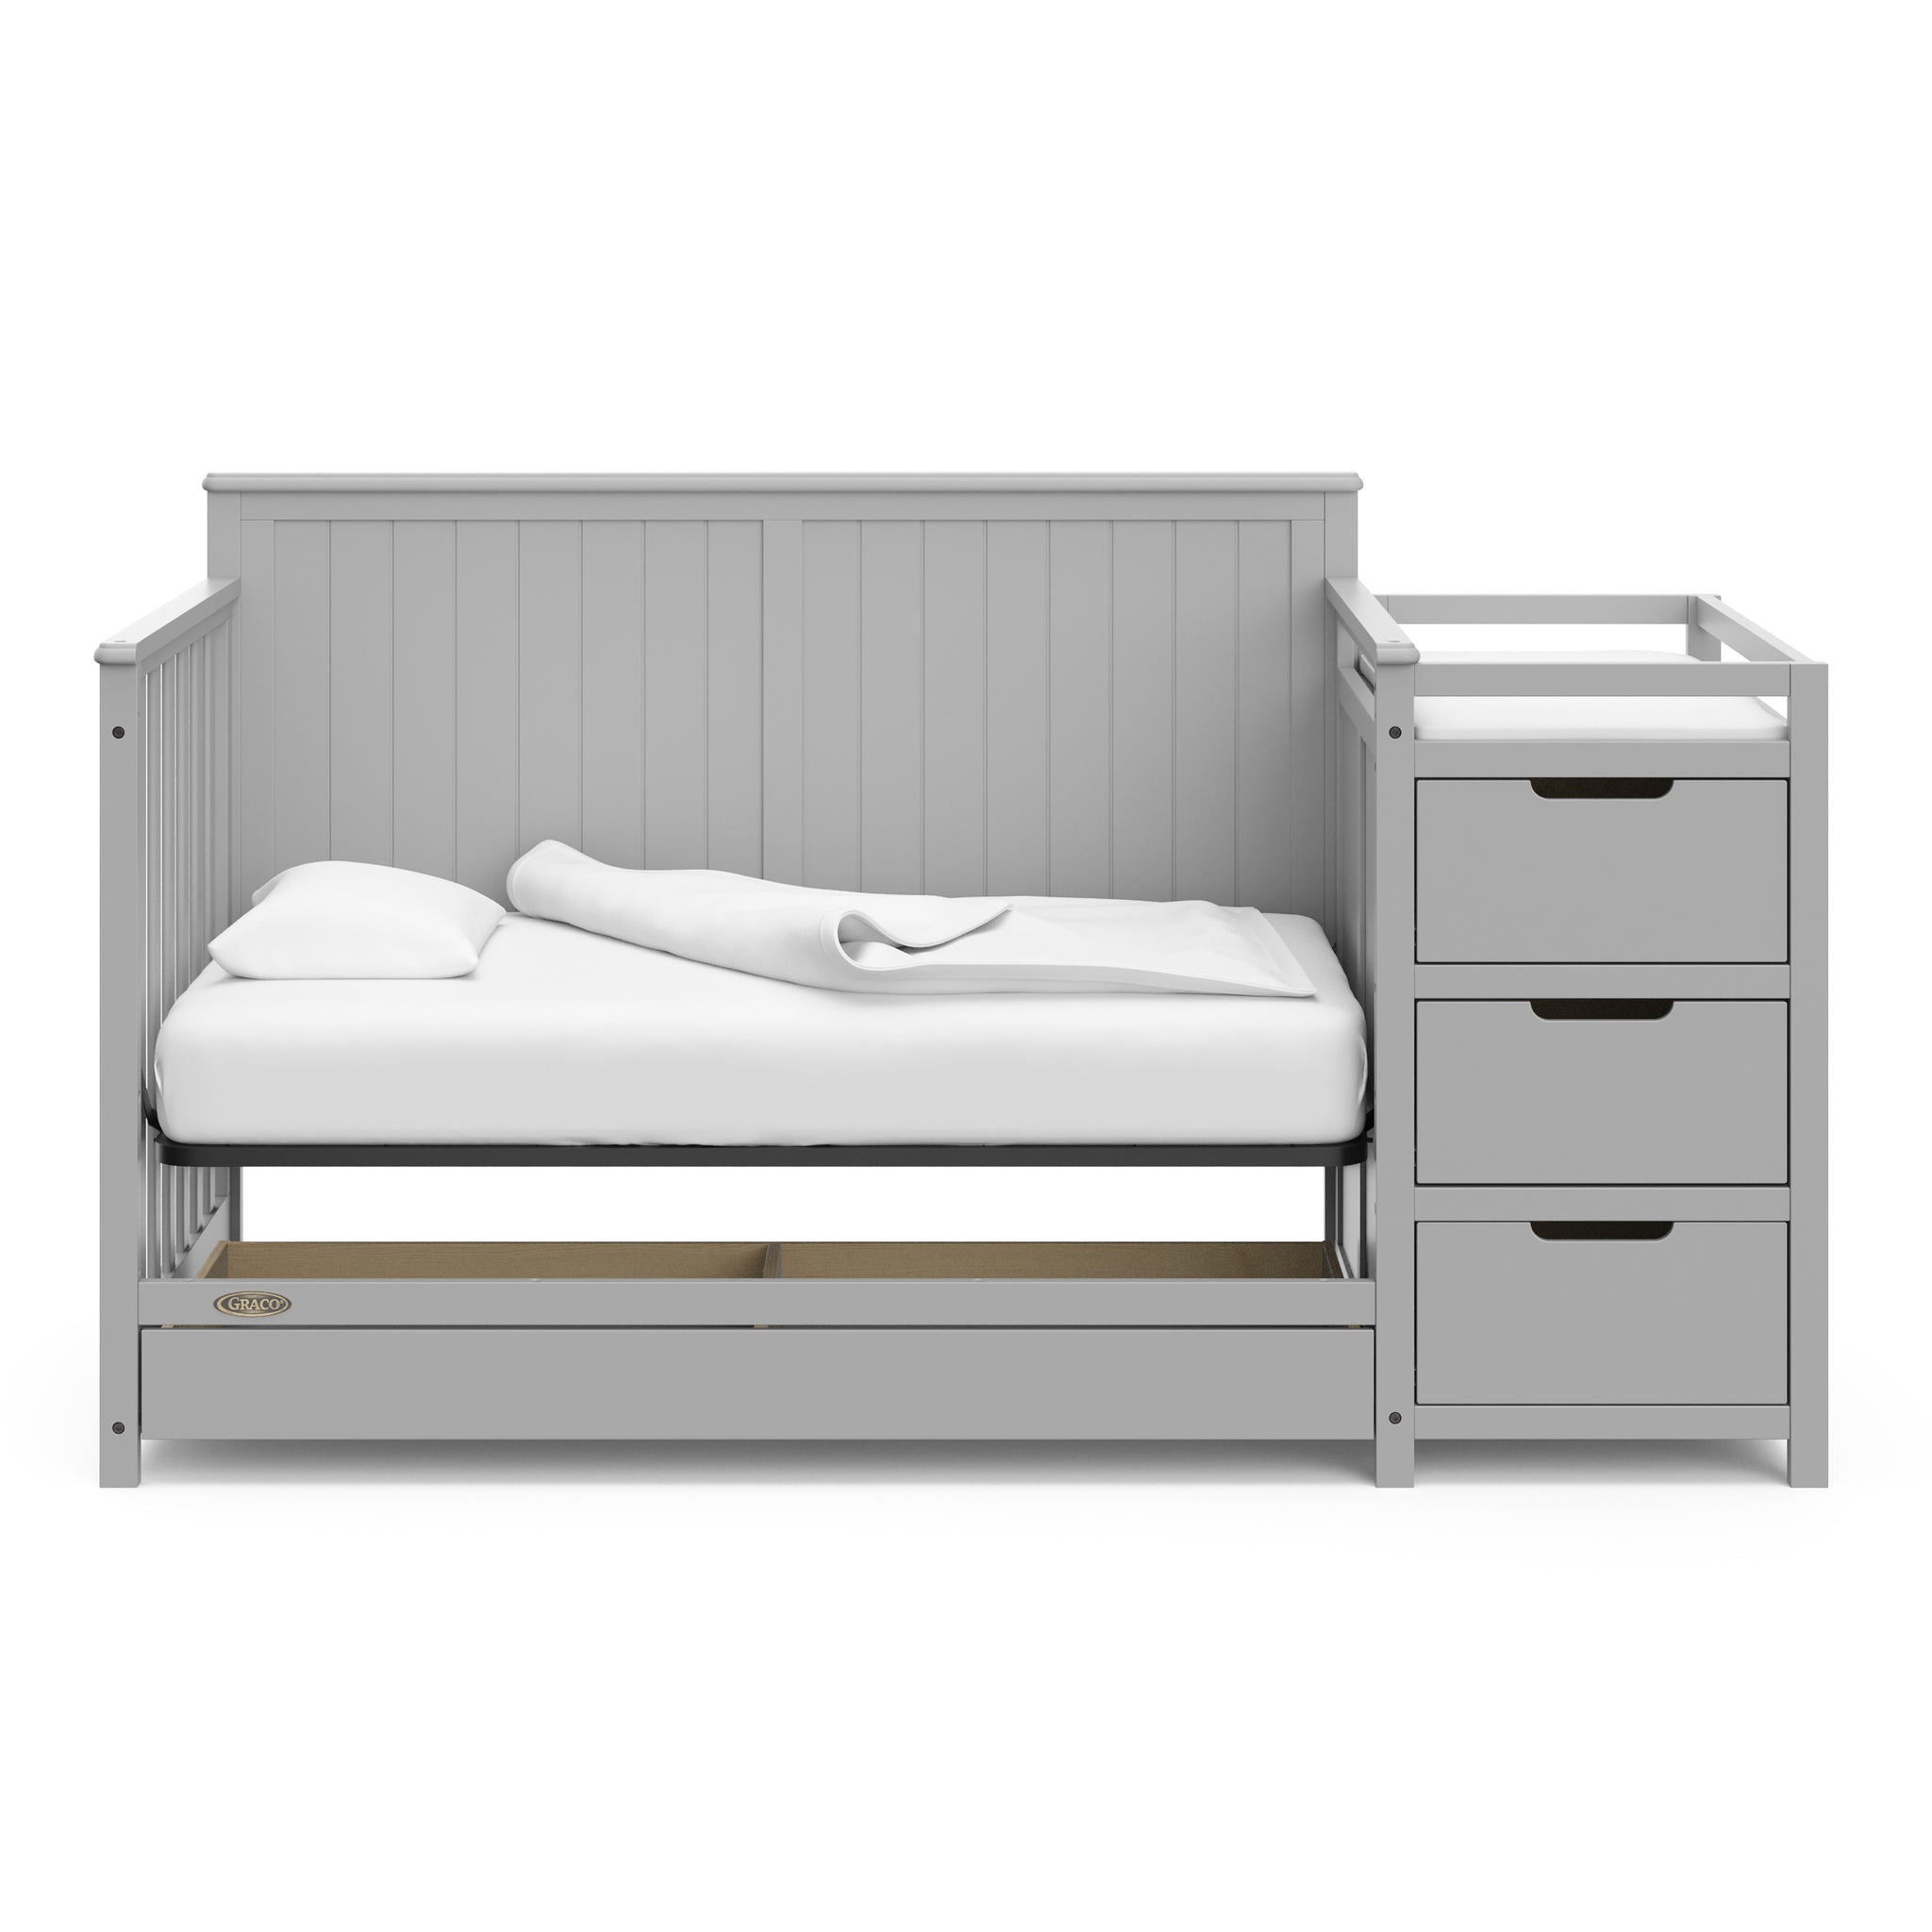 Pebble gray crib and changer with drawer in daybed conversion 